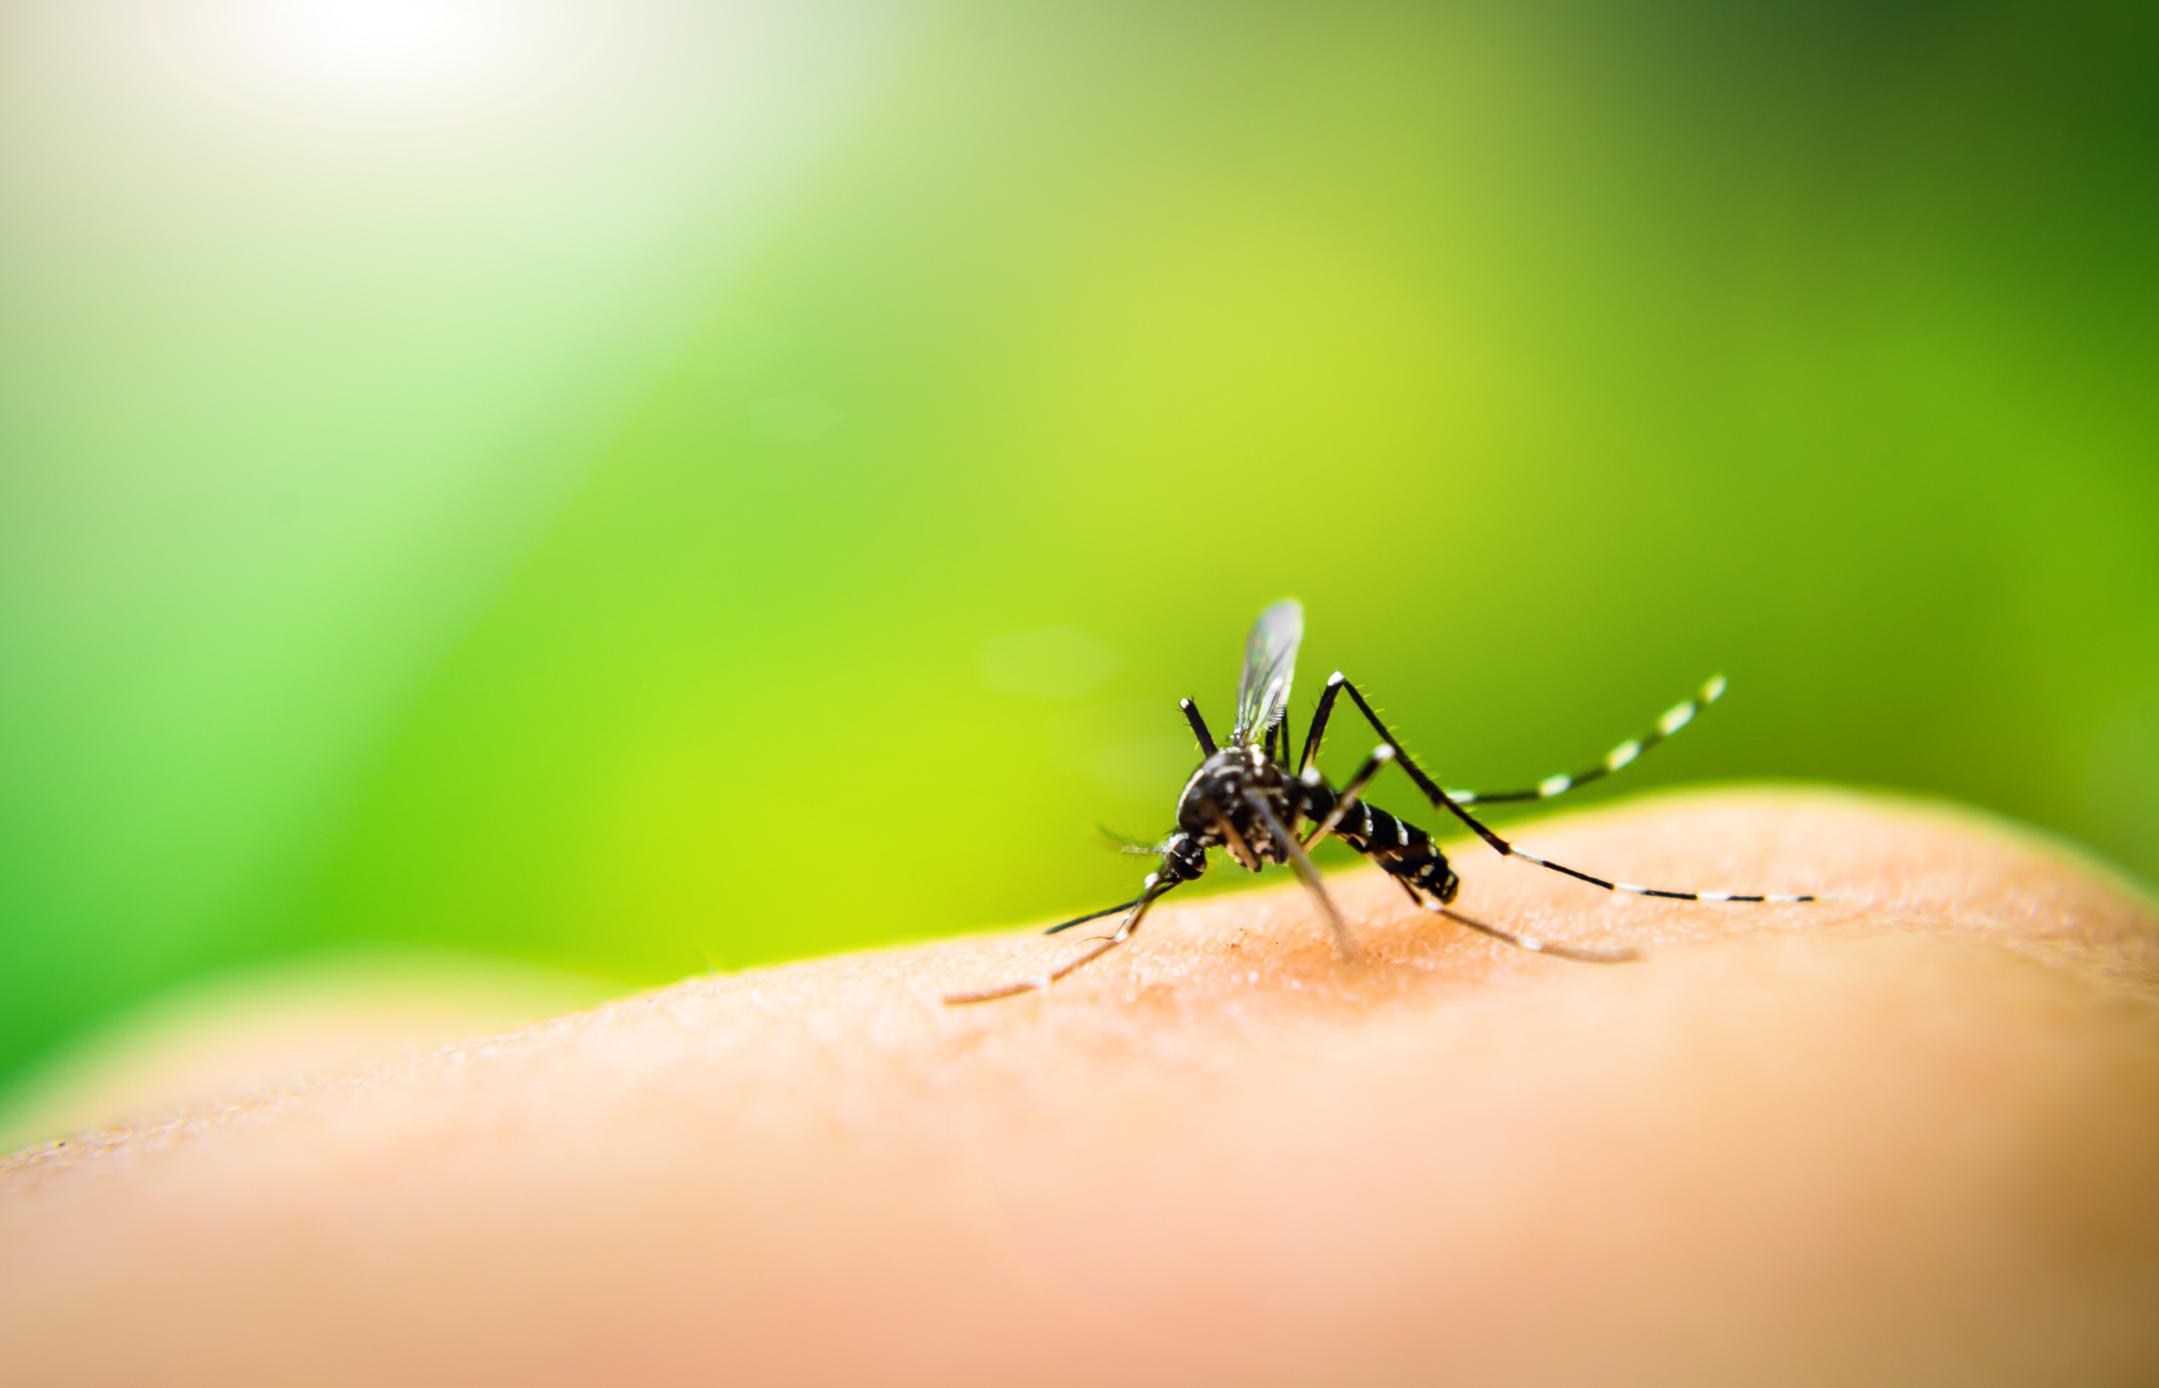 Scientists from the University of Adelaide's Research Centre for Infectious Diseases have identified a key protein that controls malaria parasite entry into host red blood cells. 